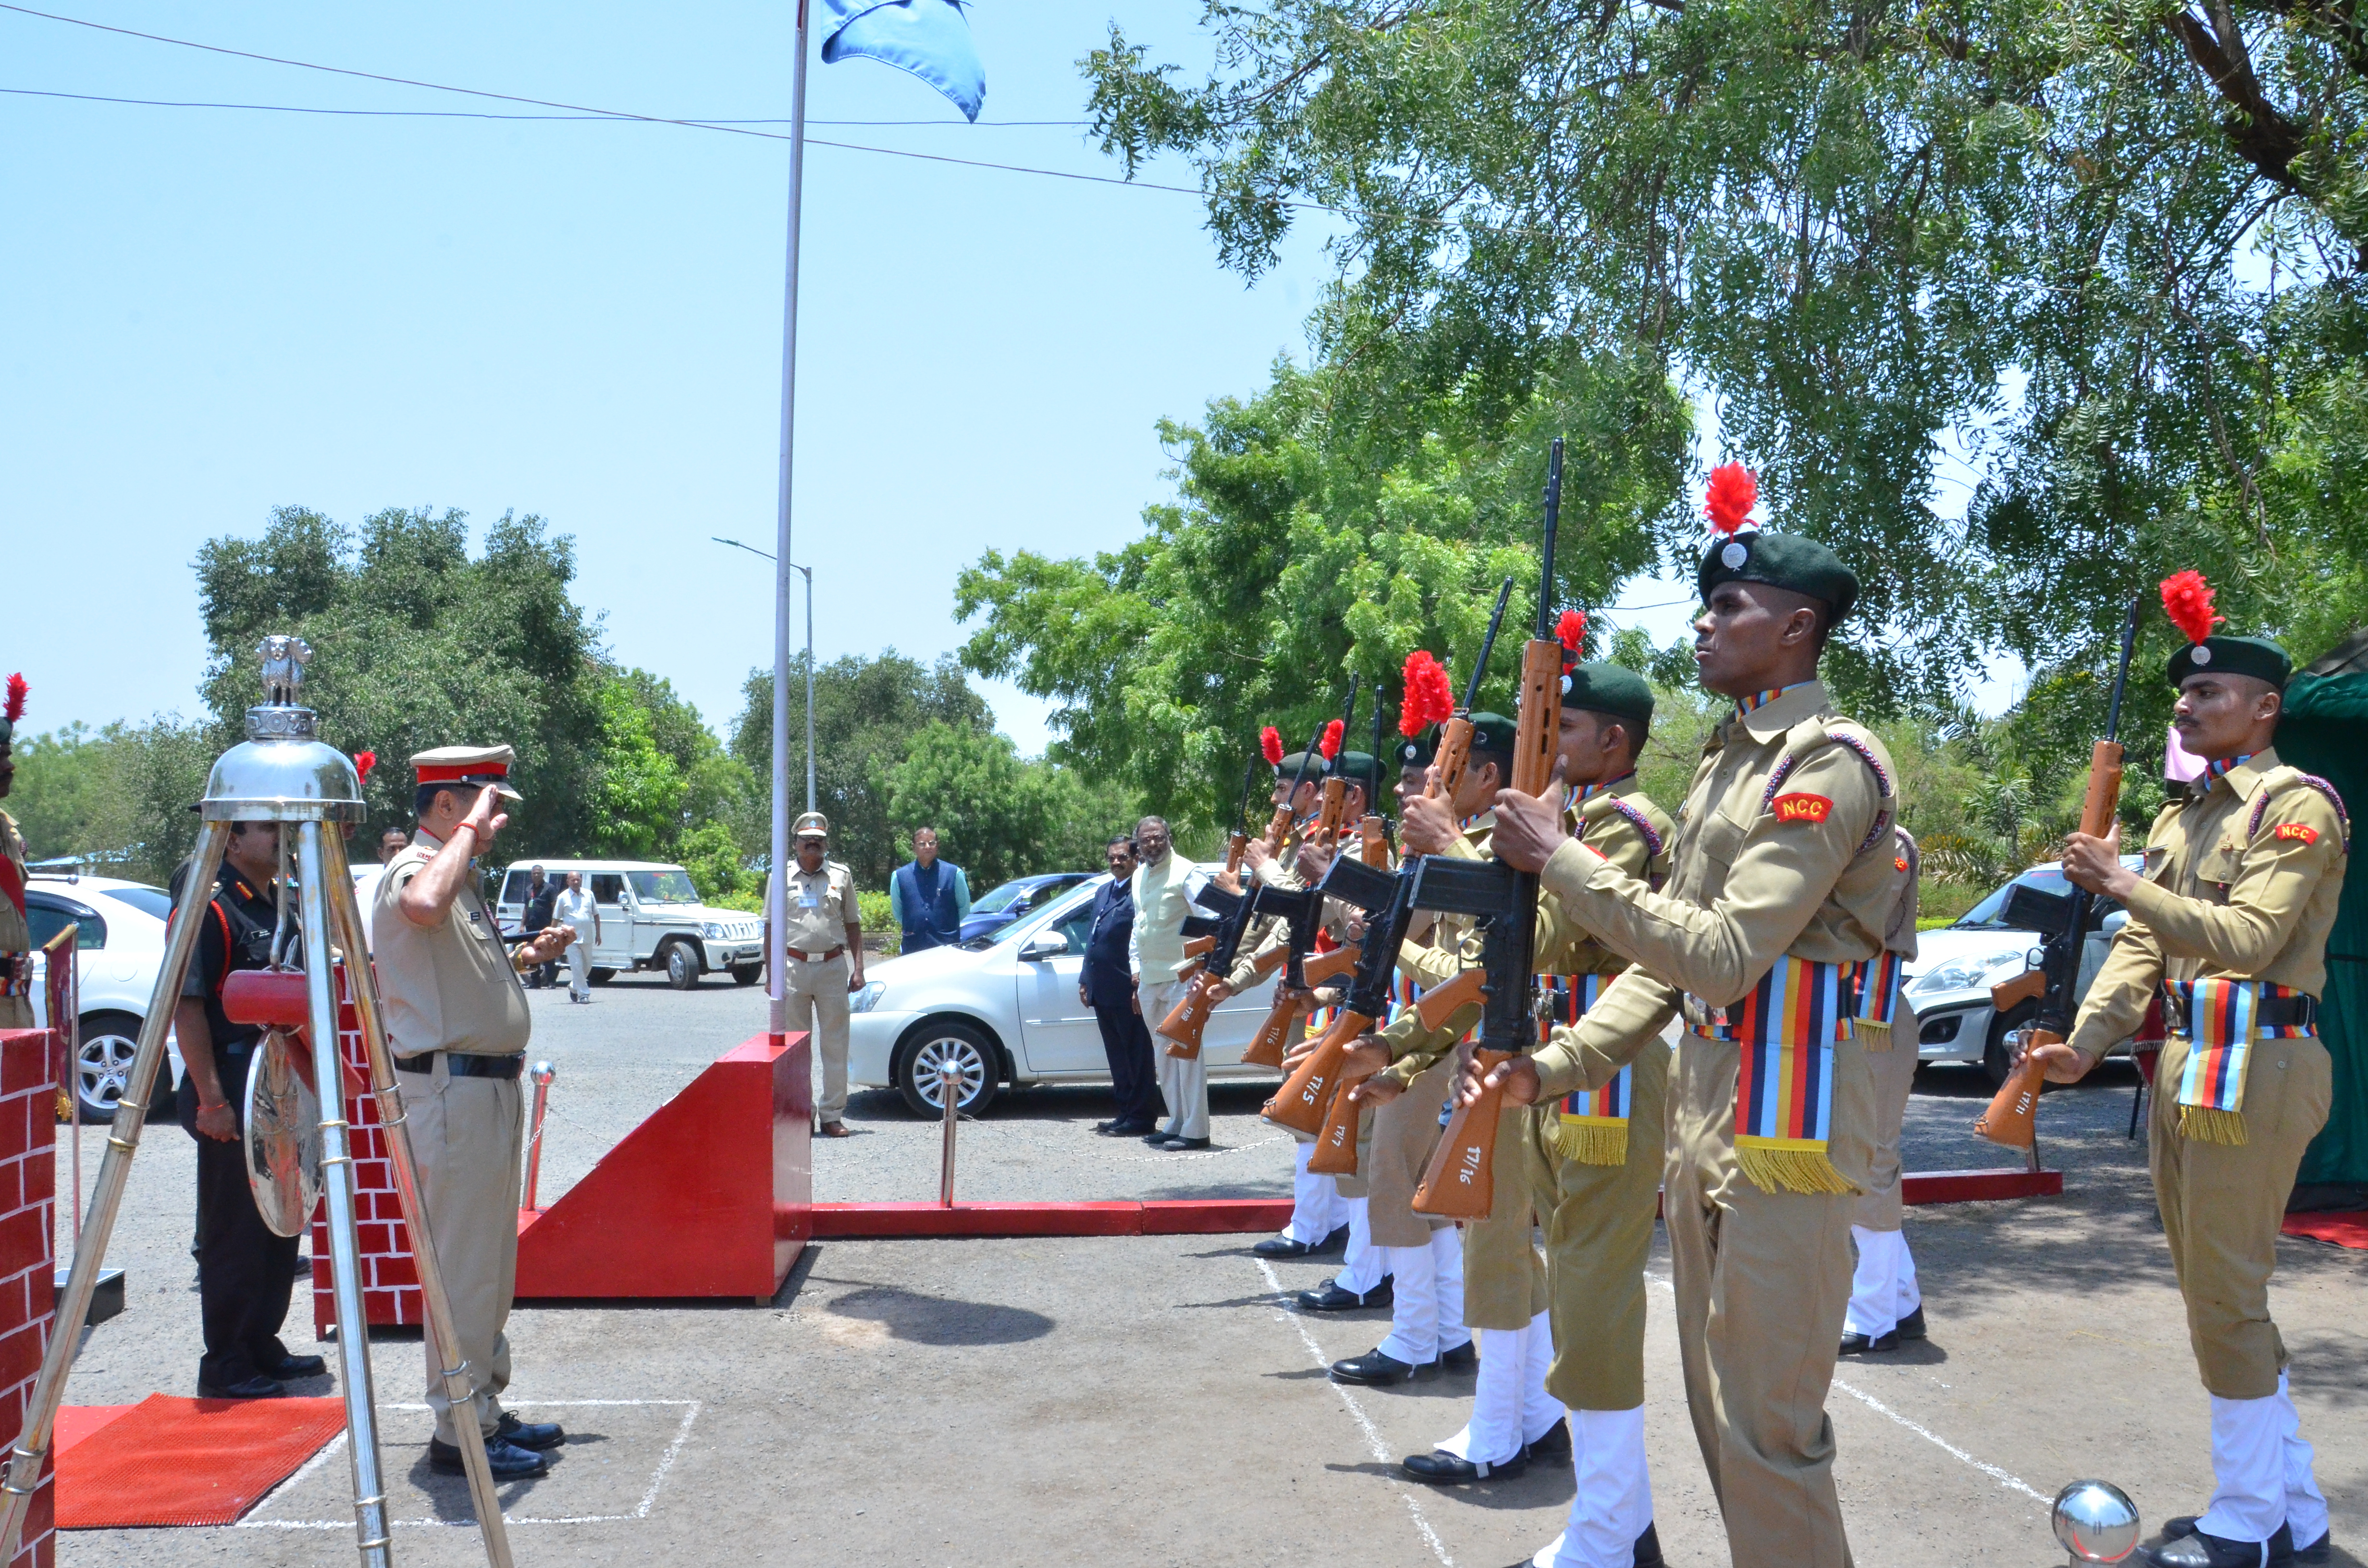 Conferment of Honorary Rank of Colonel to VC